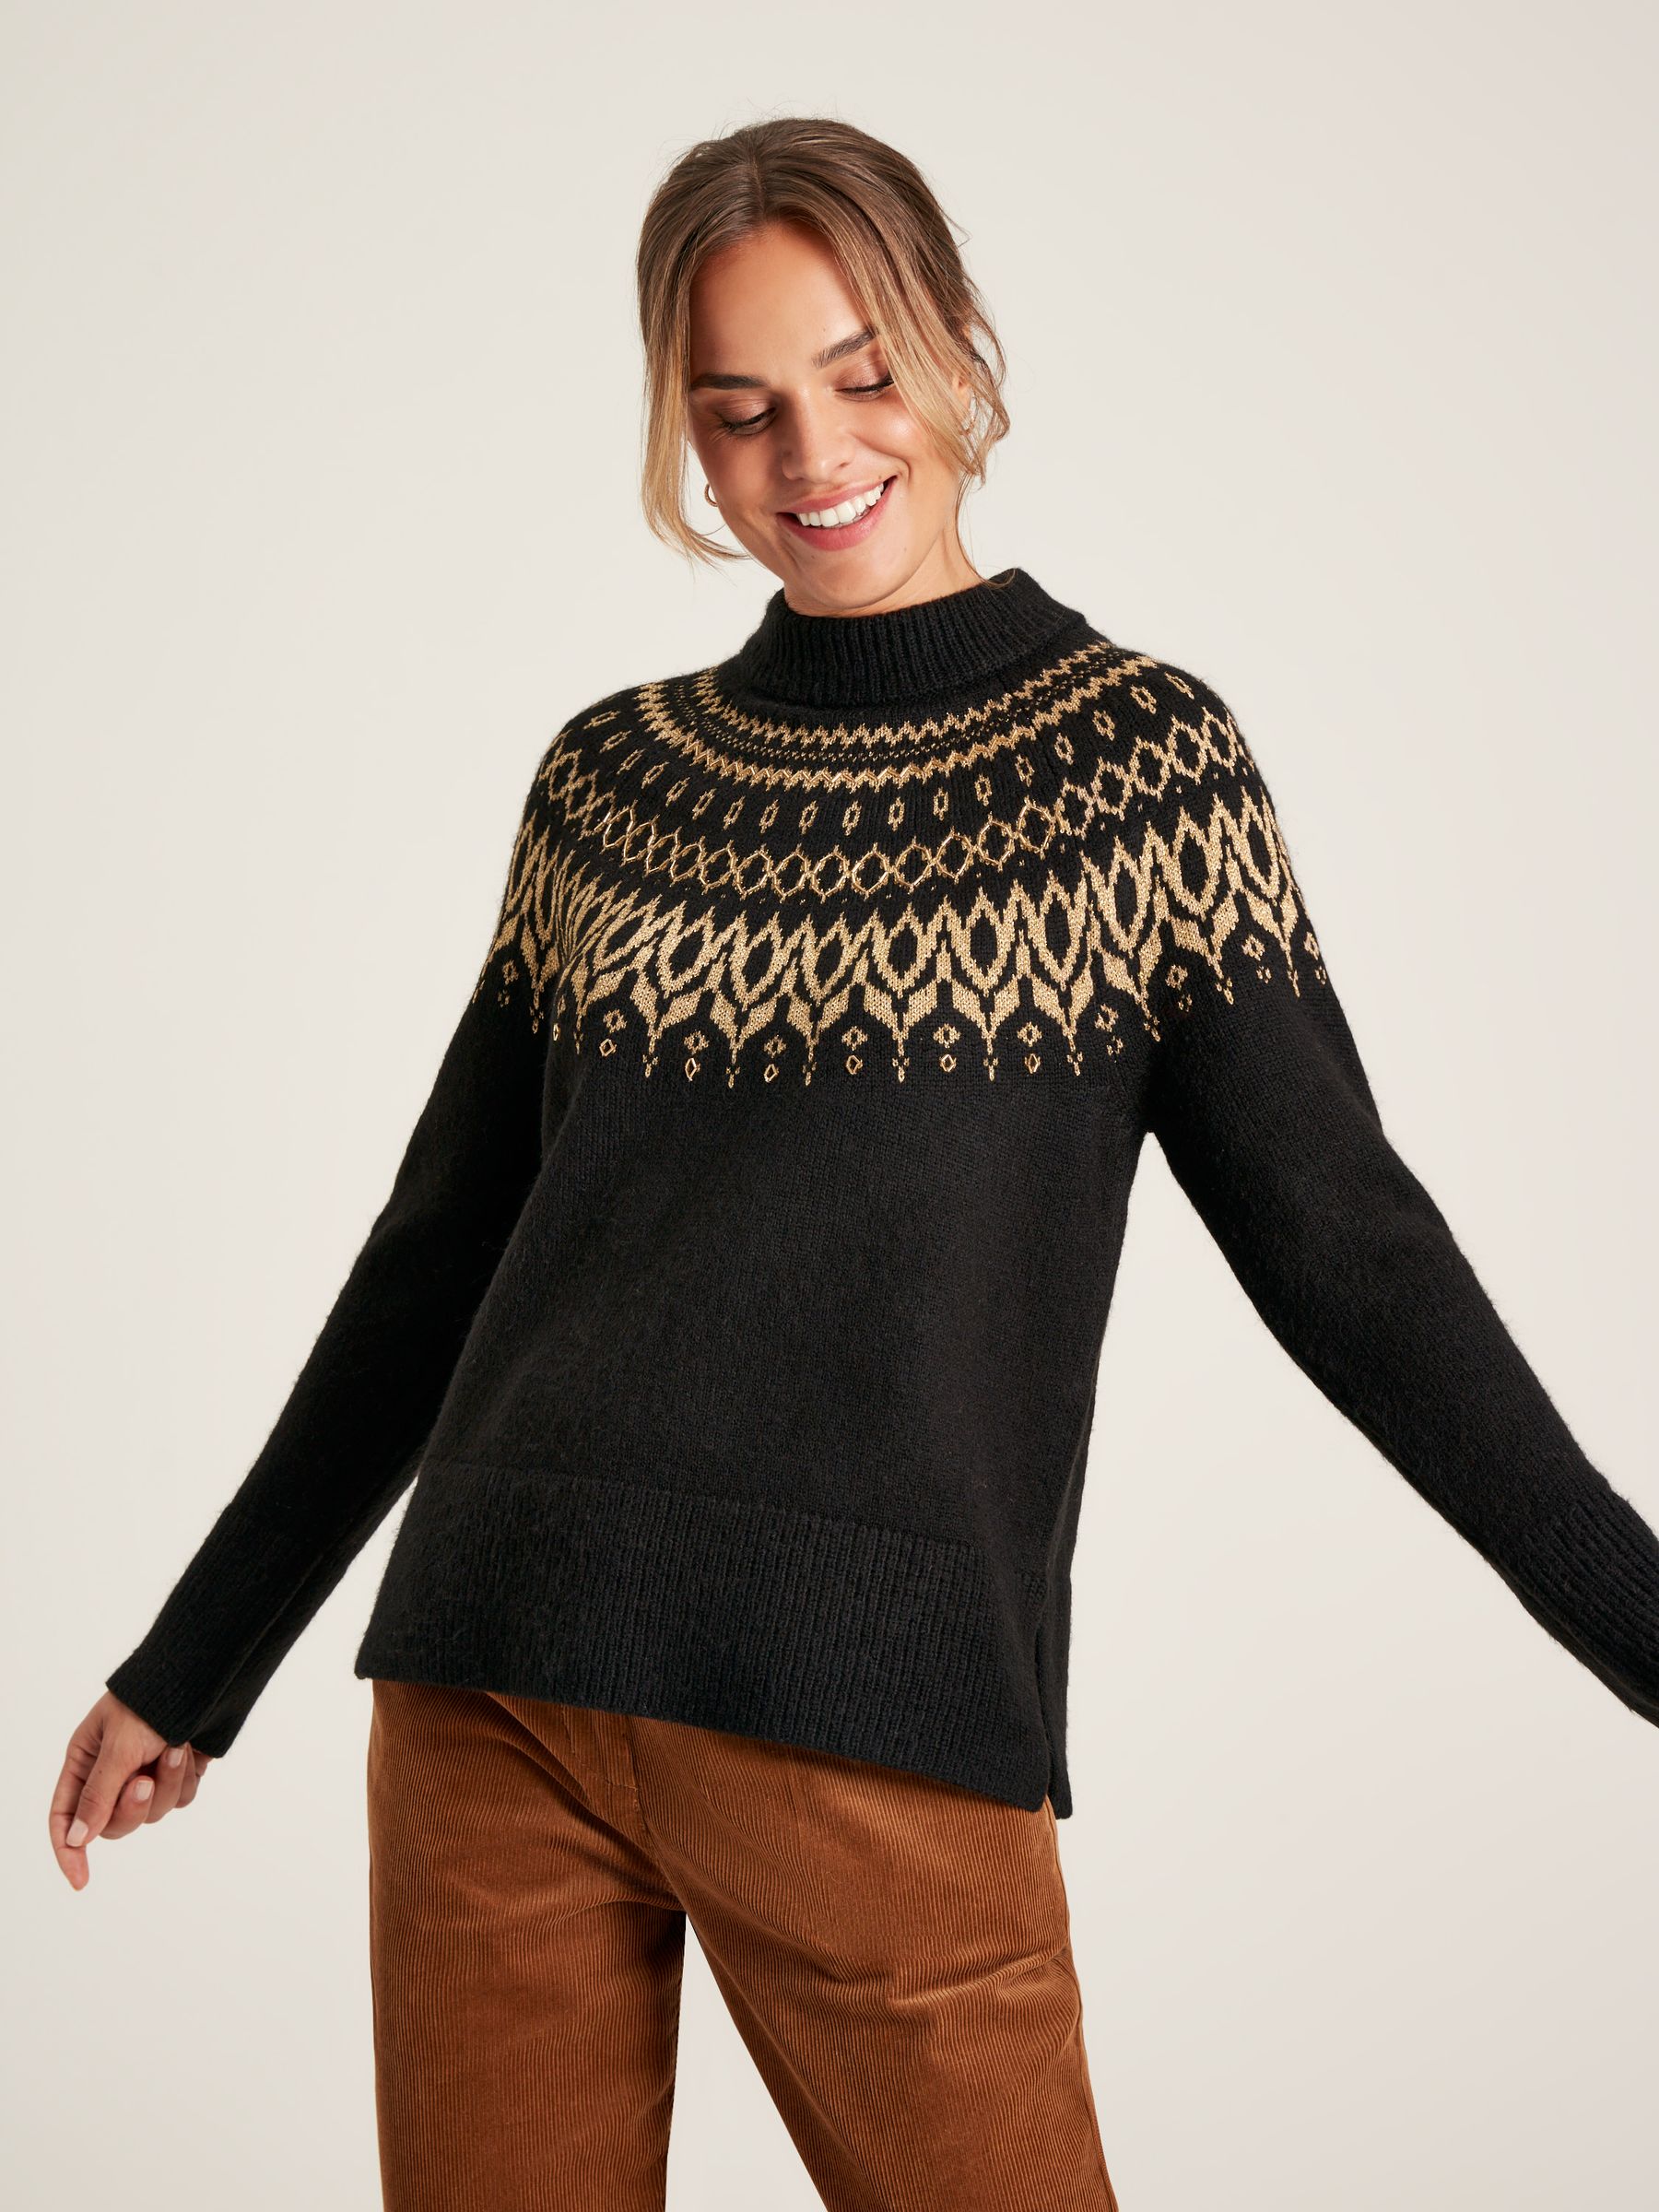 Buy Katherine Black Fair Isle Jumper from the Joules online shop